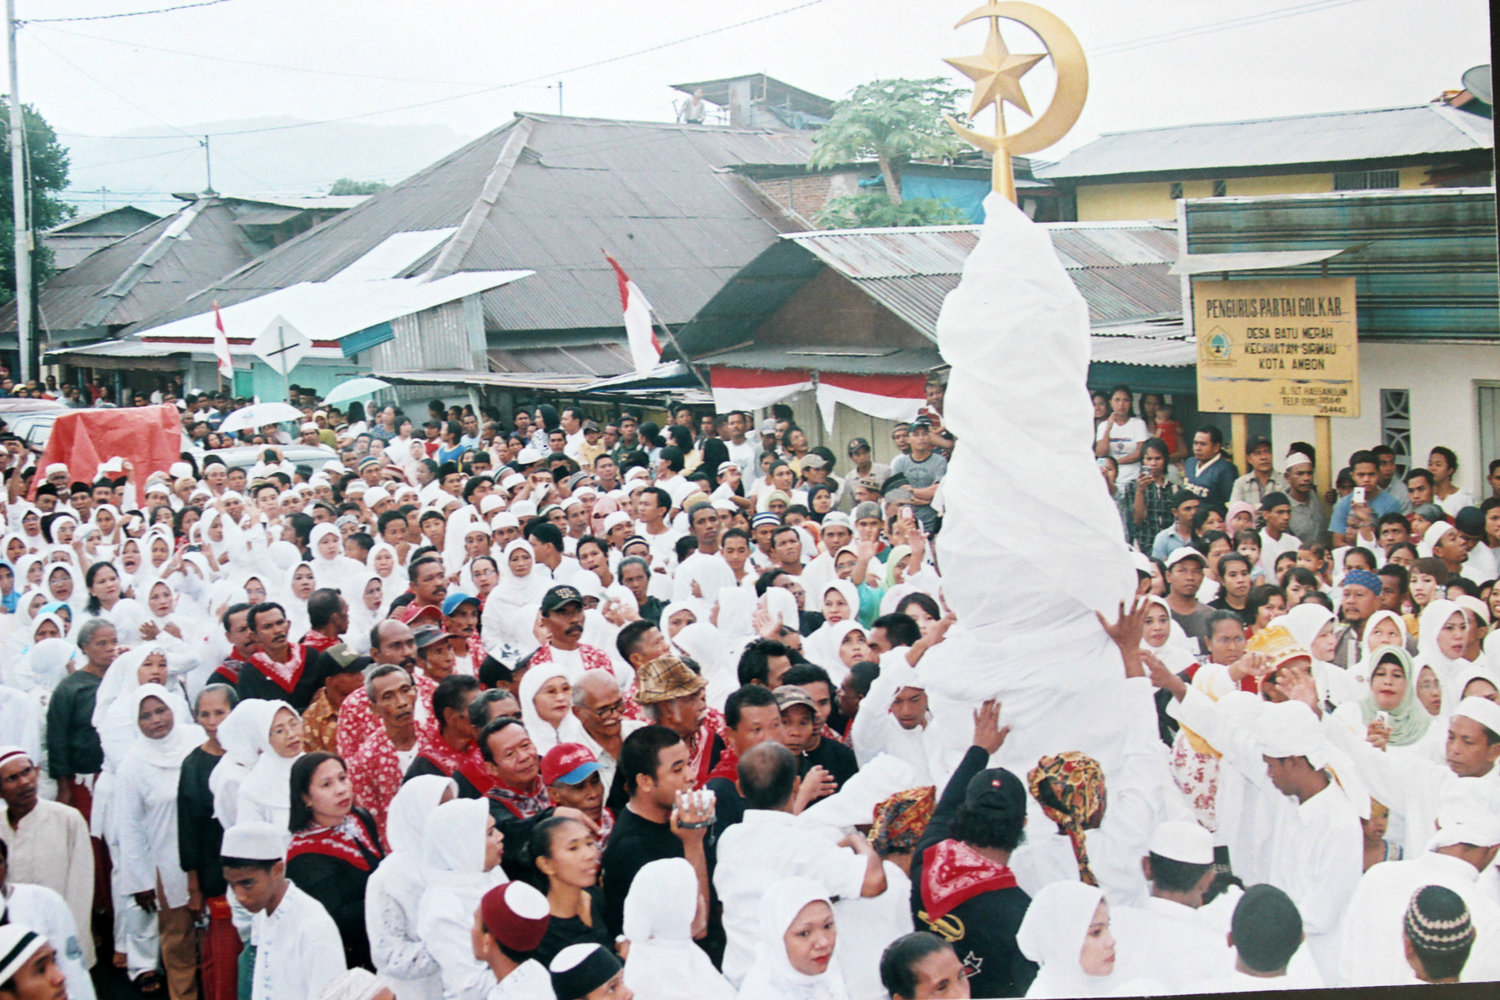 Featured image for “Marshall: This Indonesian Village Tradition Has Kept Peace Between Christians And Muslims”